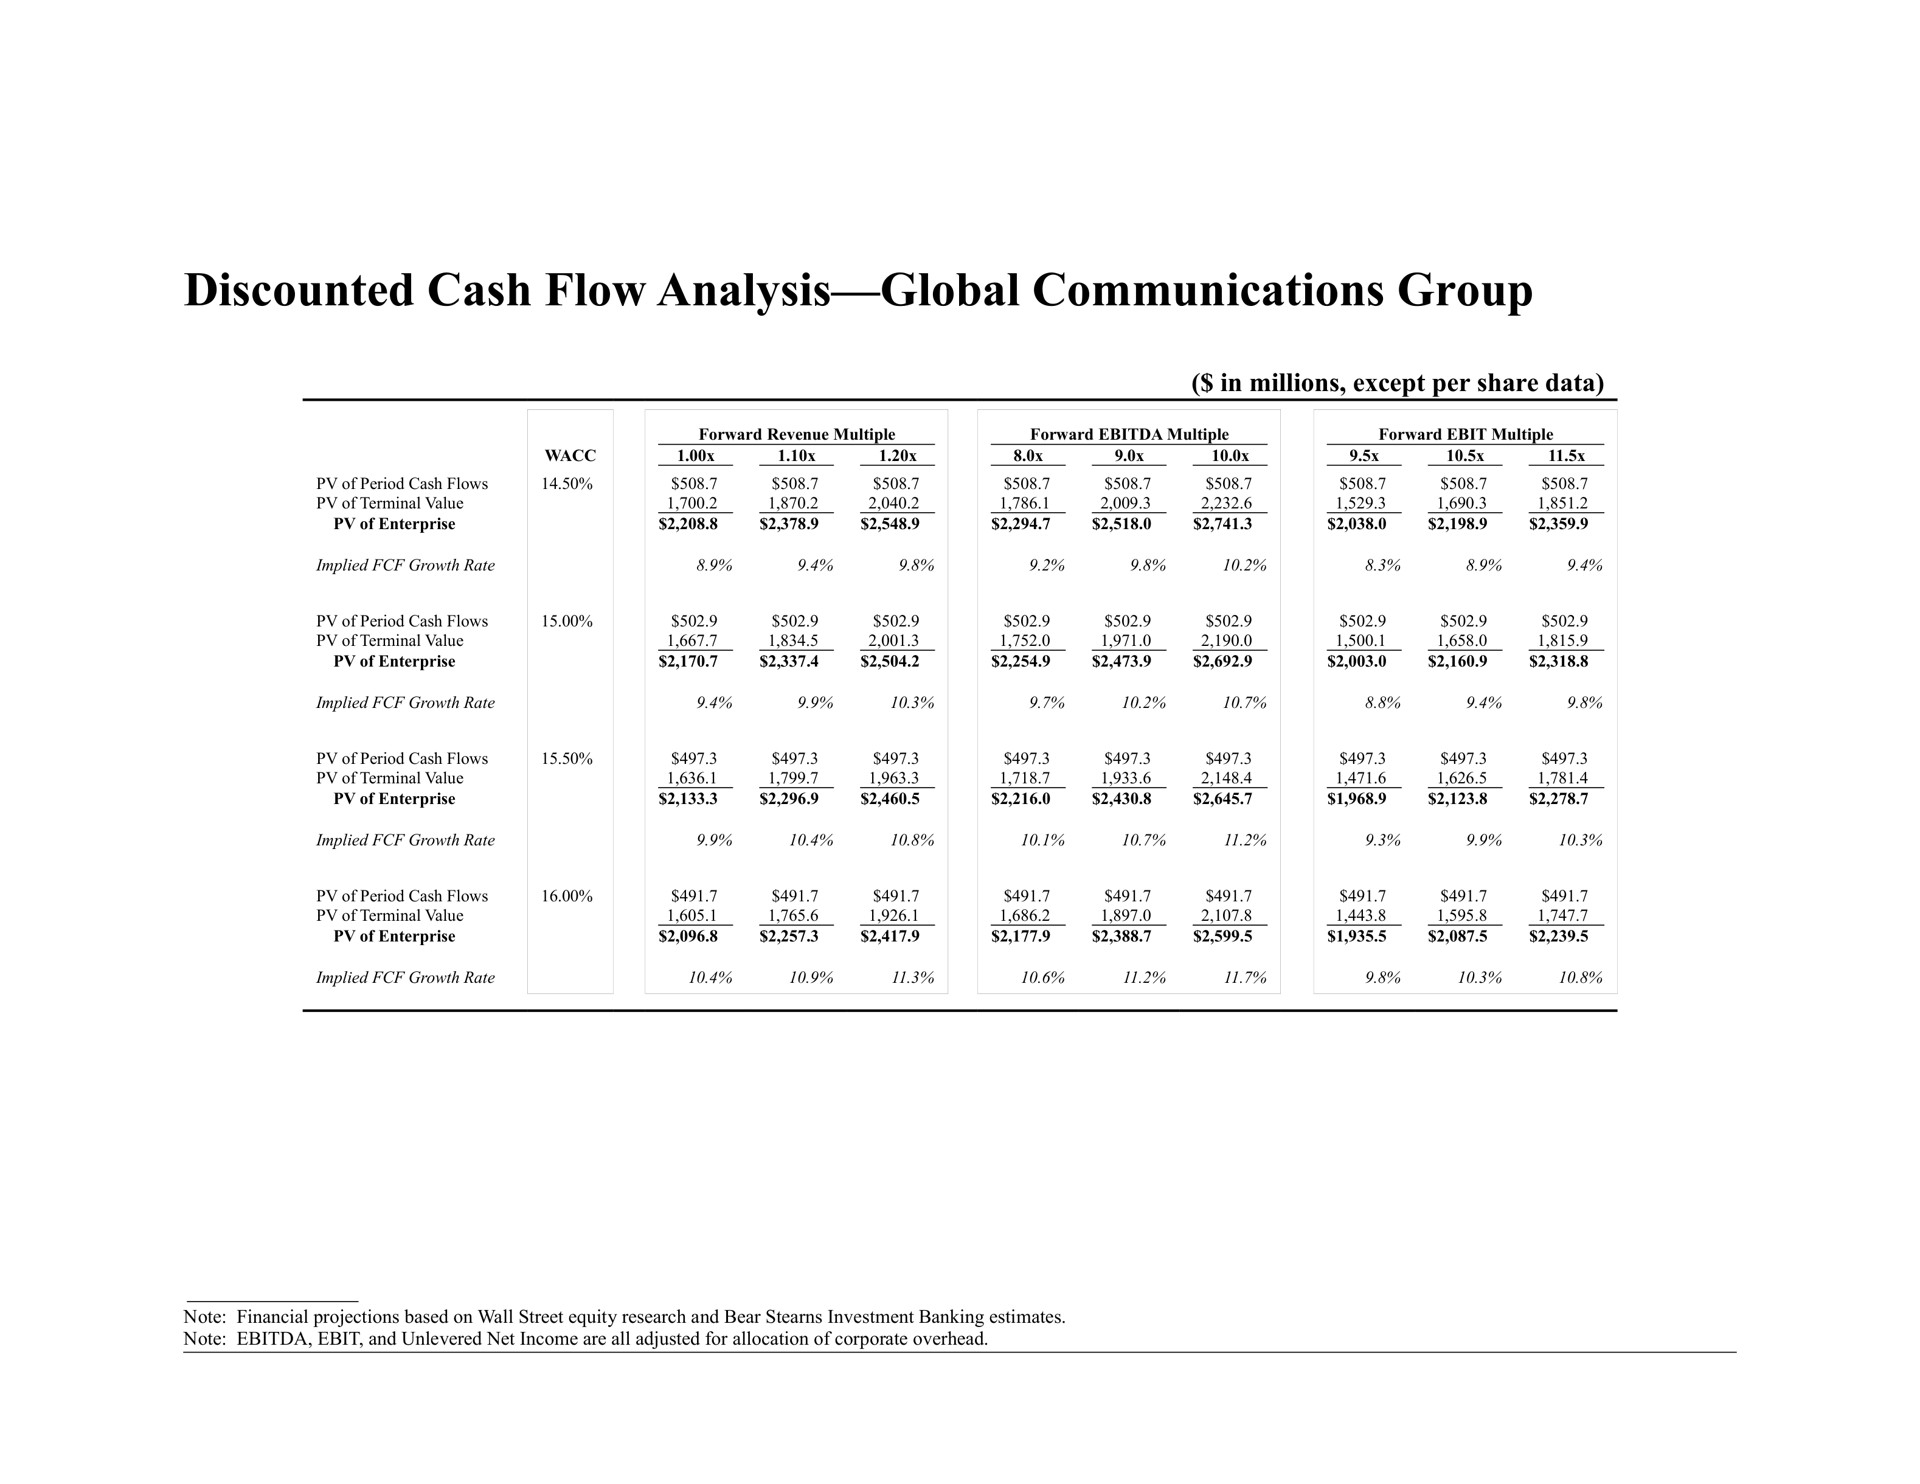 discounted cash flow analysis global communications group | Bear Stearns